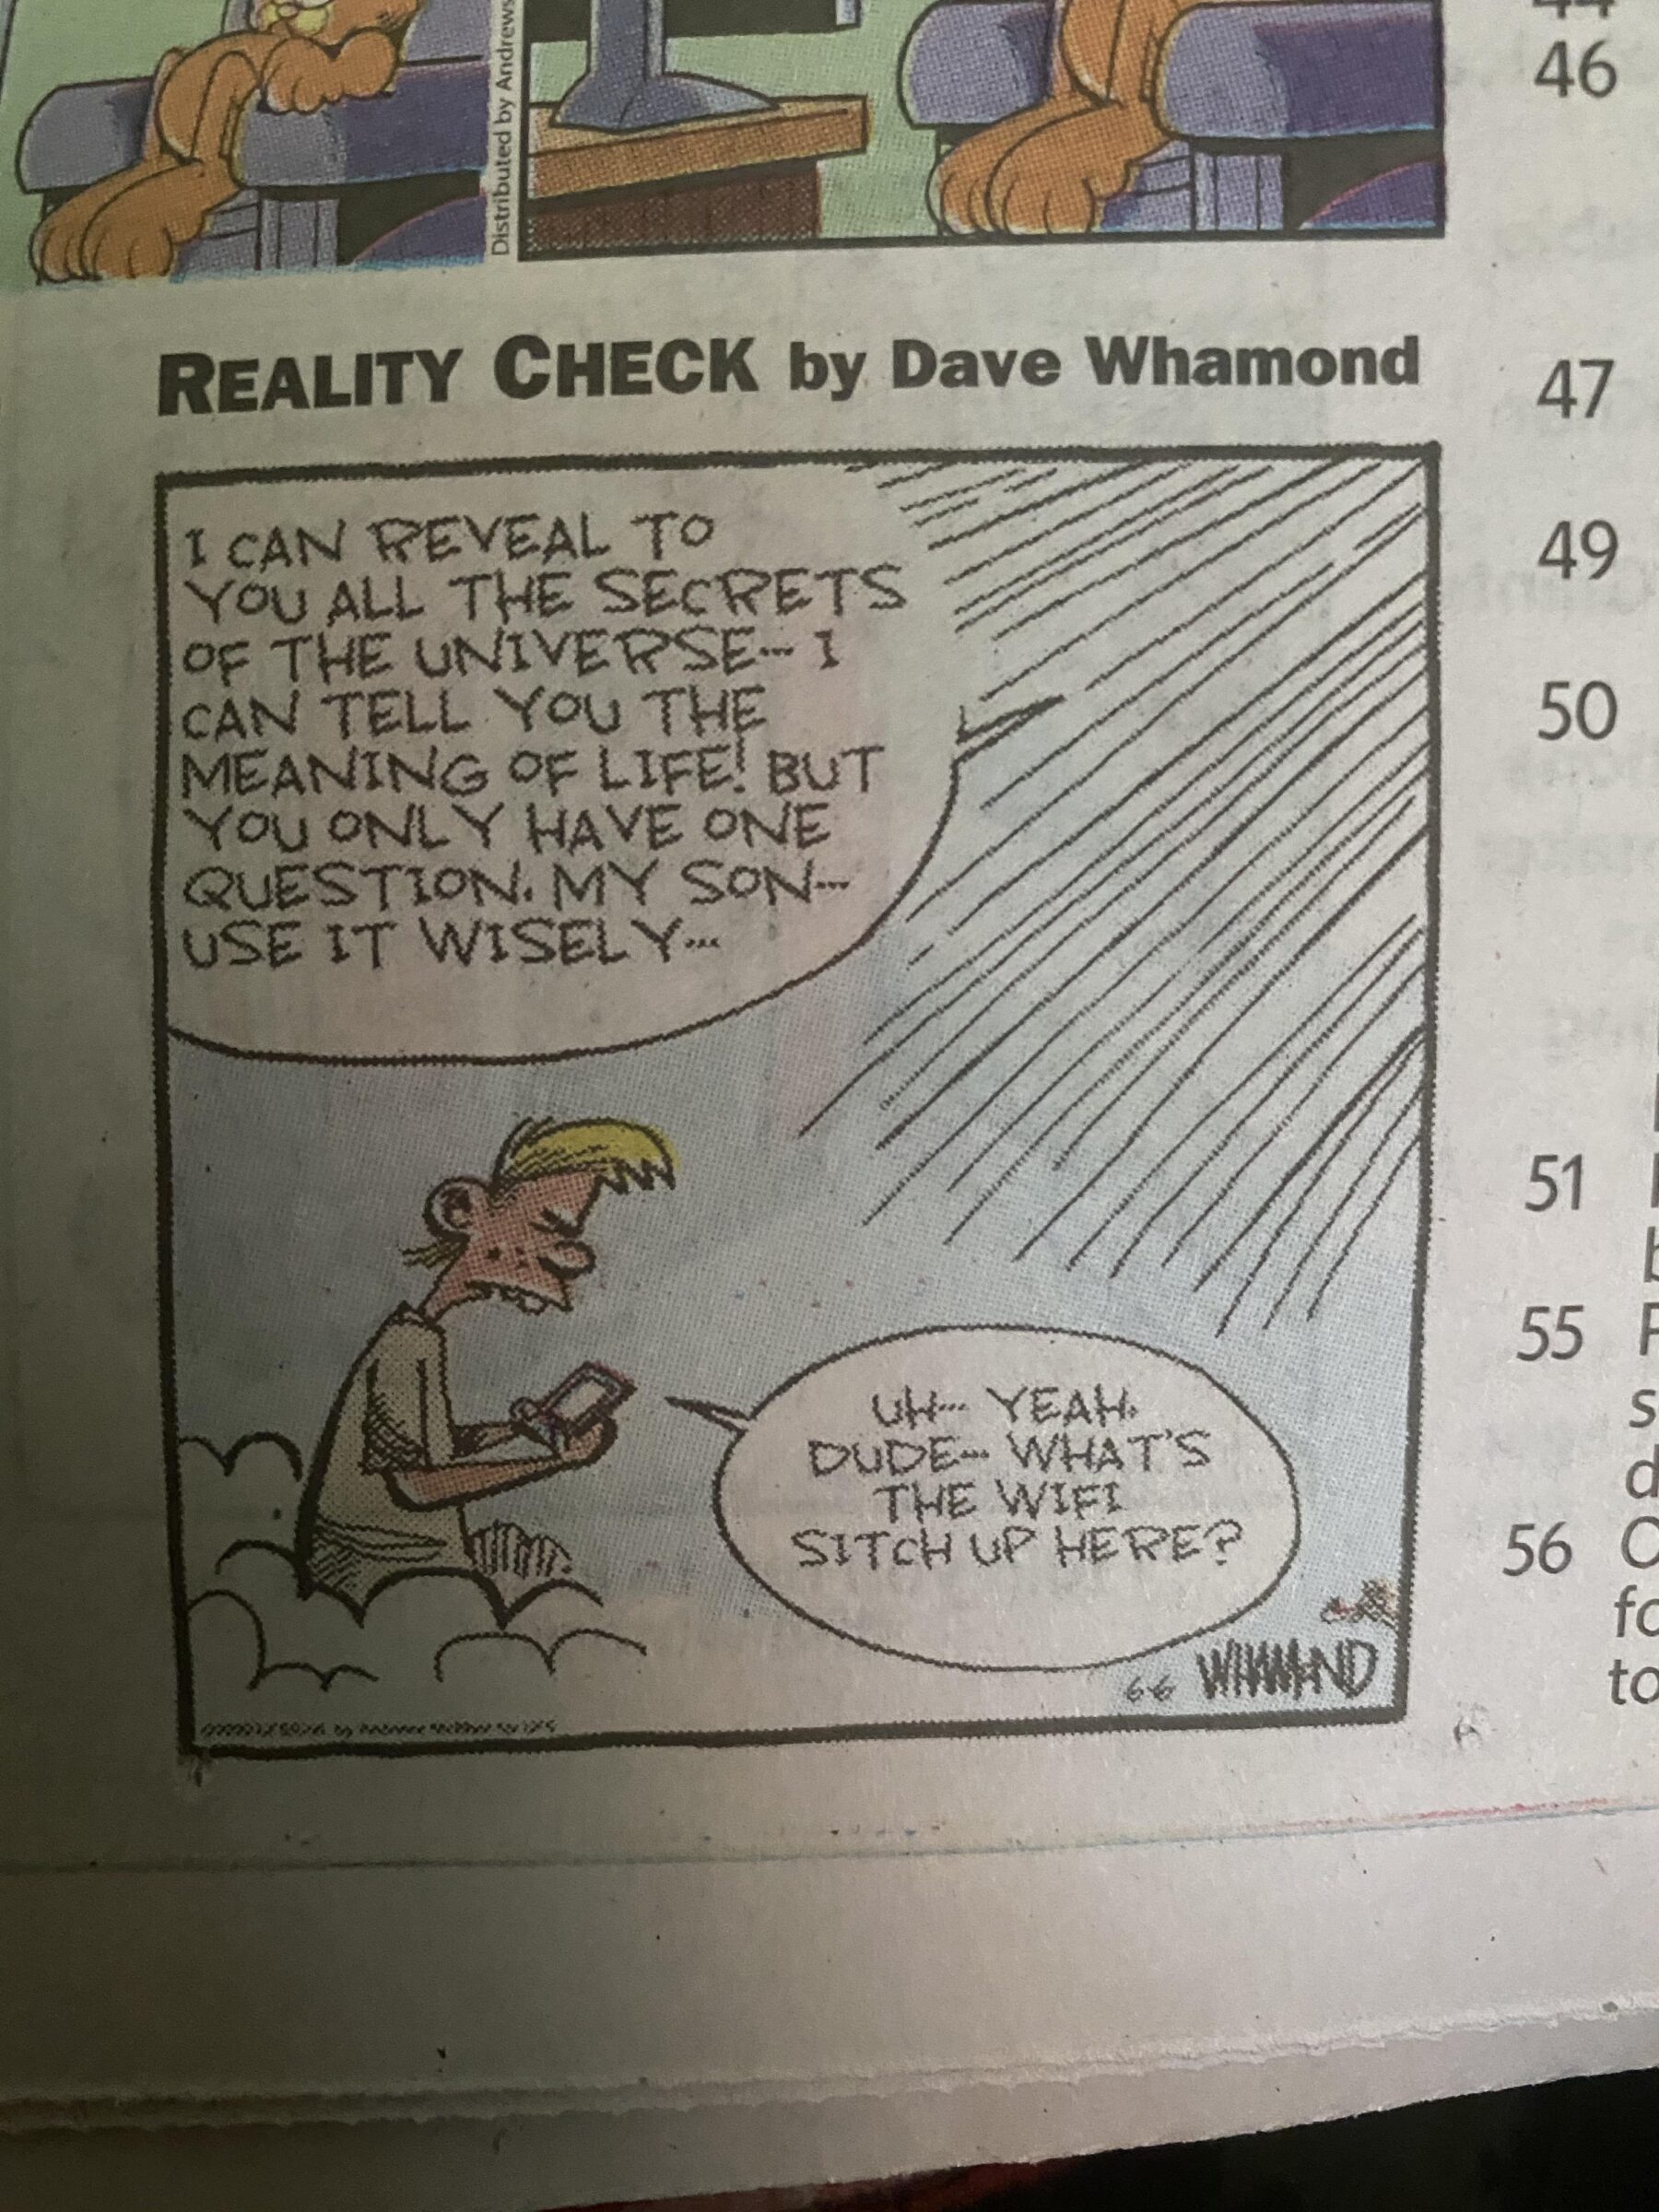 Cringe, Saw boomer memes Cringe, Saw text: REALITY CHECK by Dave Whamond CAN REVEAL TO You ALL SvcRETS OF uNIVEQSg.« 1 CAN TELL You THF OF LIFE. BUT You oNLY HAVE ONE usg IT WISELYm stTcH up HERB'? 46 47 50 51 55 S 56 to 